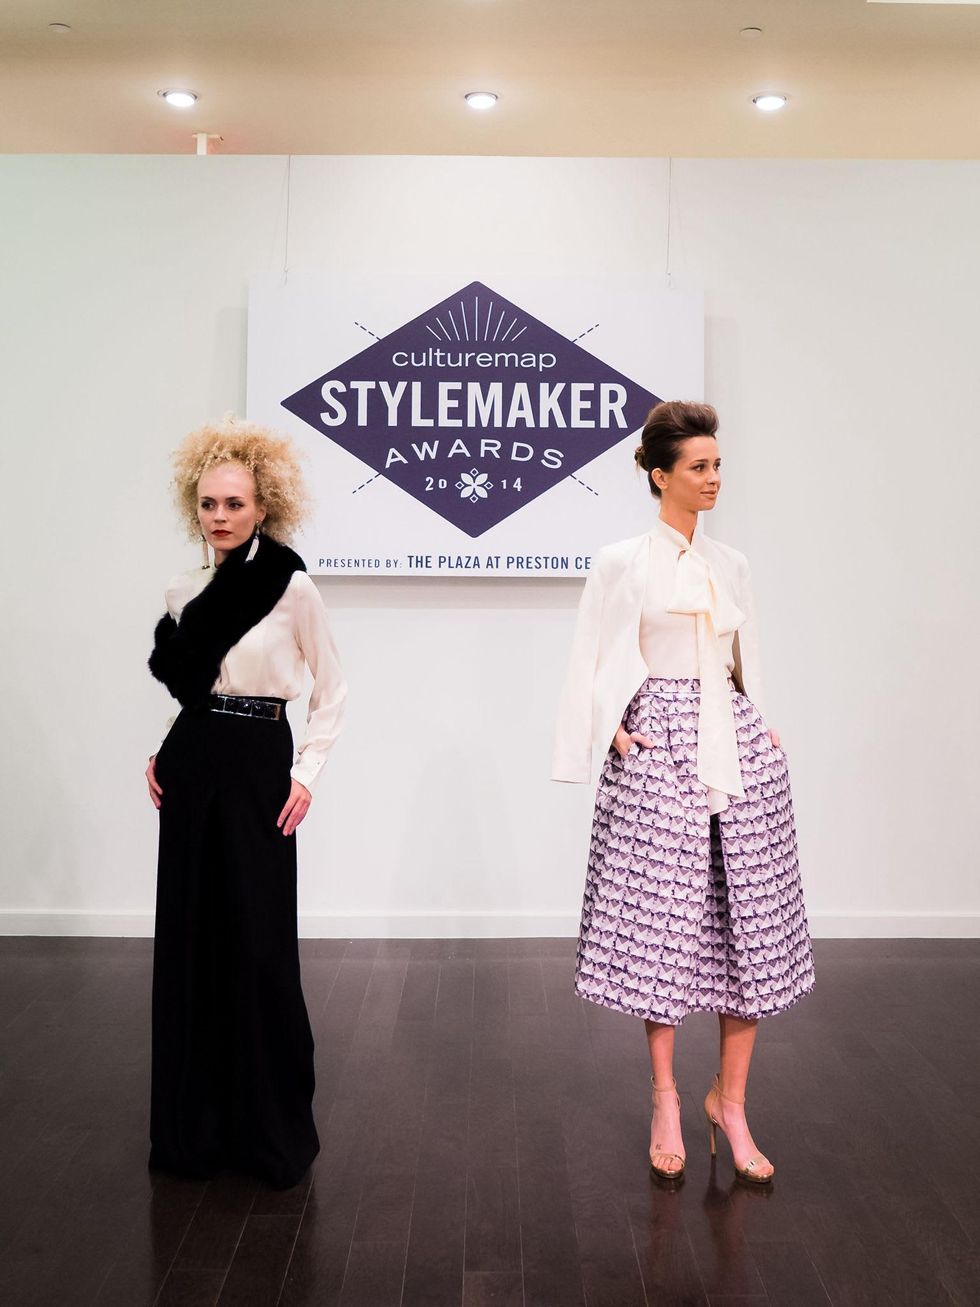 Maleiah Rogers' looks at 2014 CultureMap Stylemaker Awards